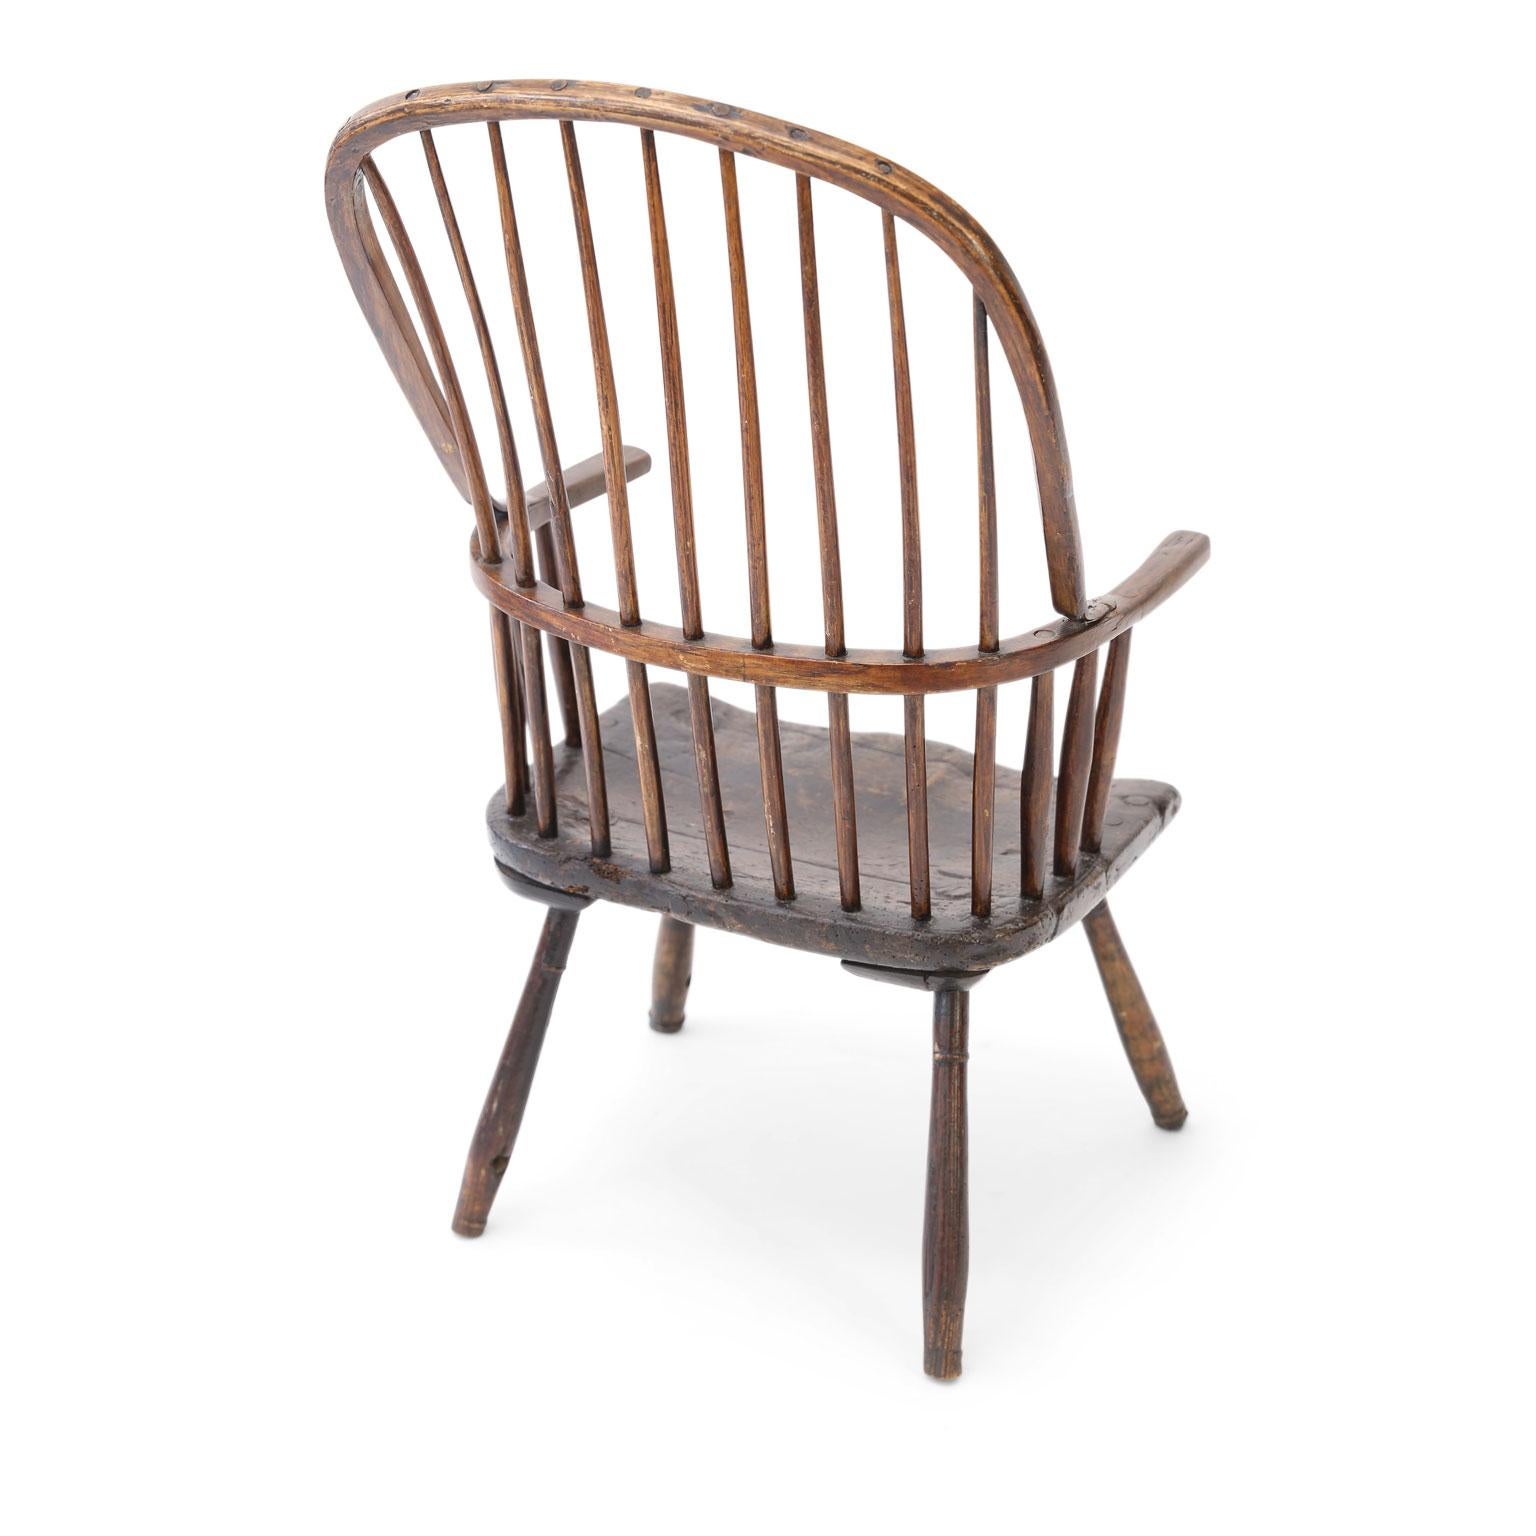 Primitive Windsor chair in yew and elm woods. Very sturdy with some restoration to arms. Constructed in a vernacular fashion circa 1770-1790 in the vicinity of Somerset, England.